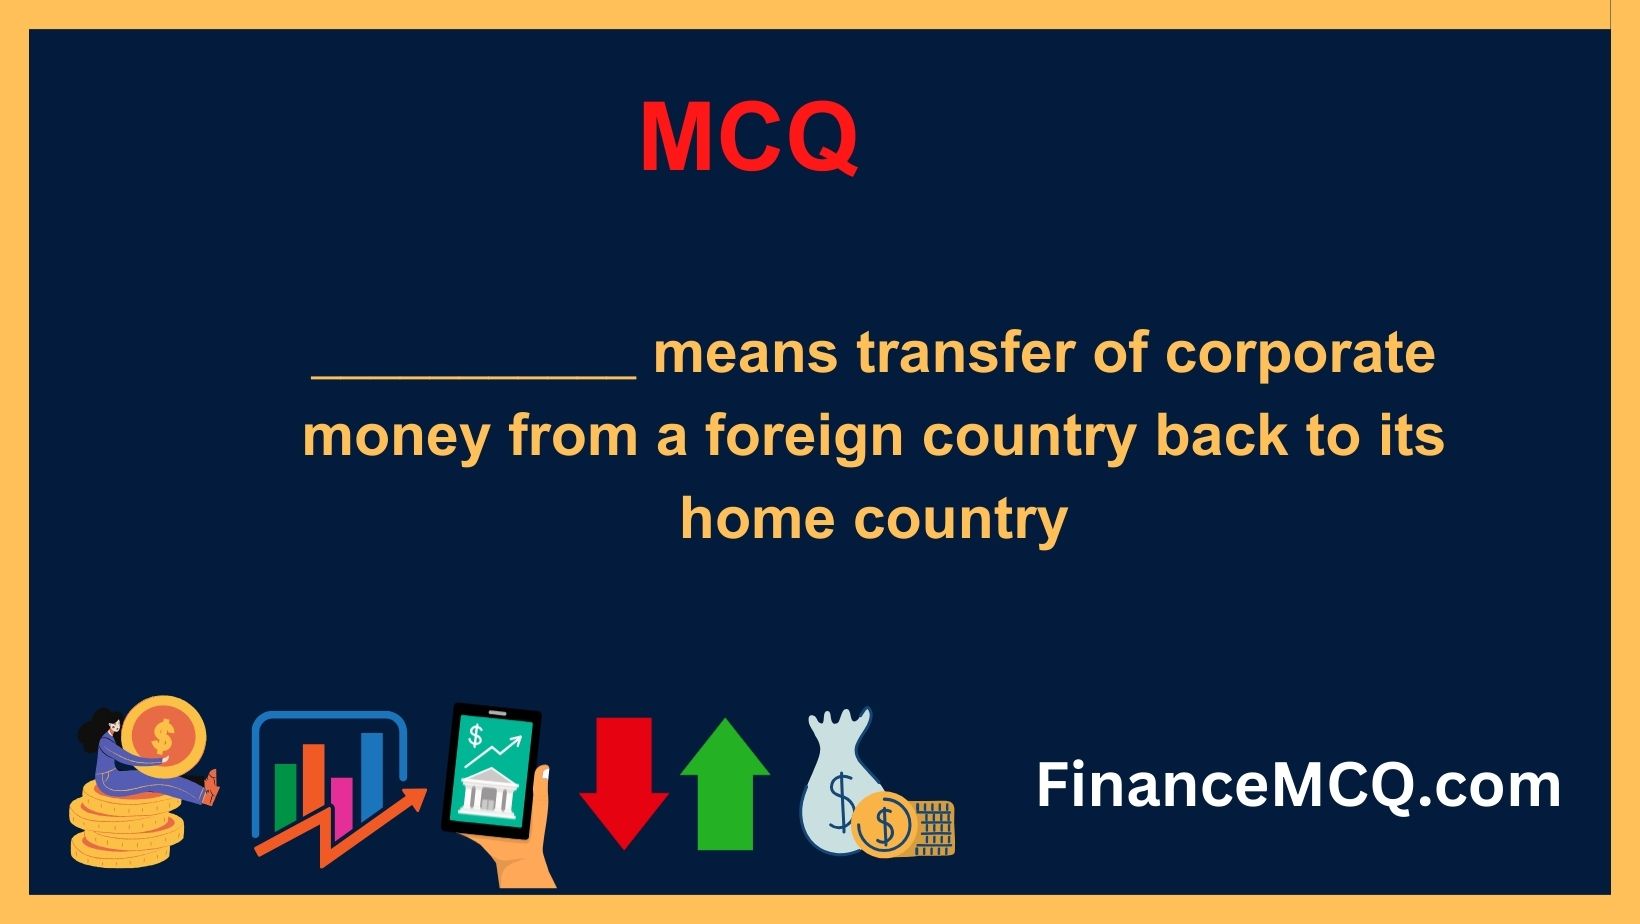 ___________ means transfer of corporate money from a foreign country back to its home country